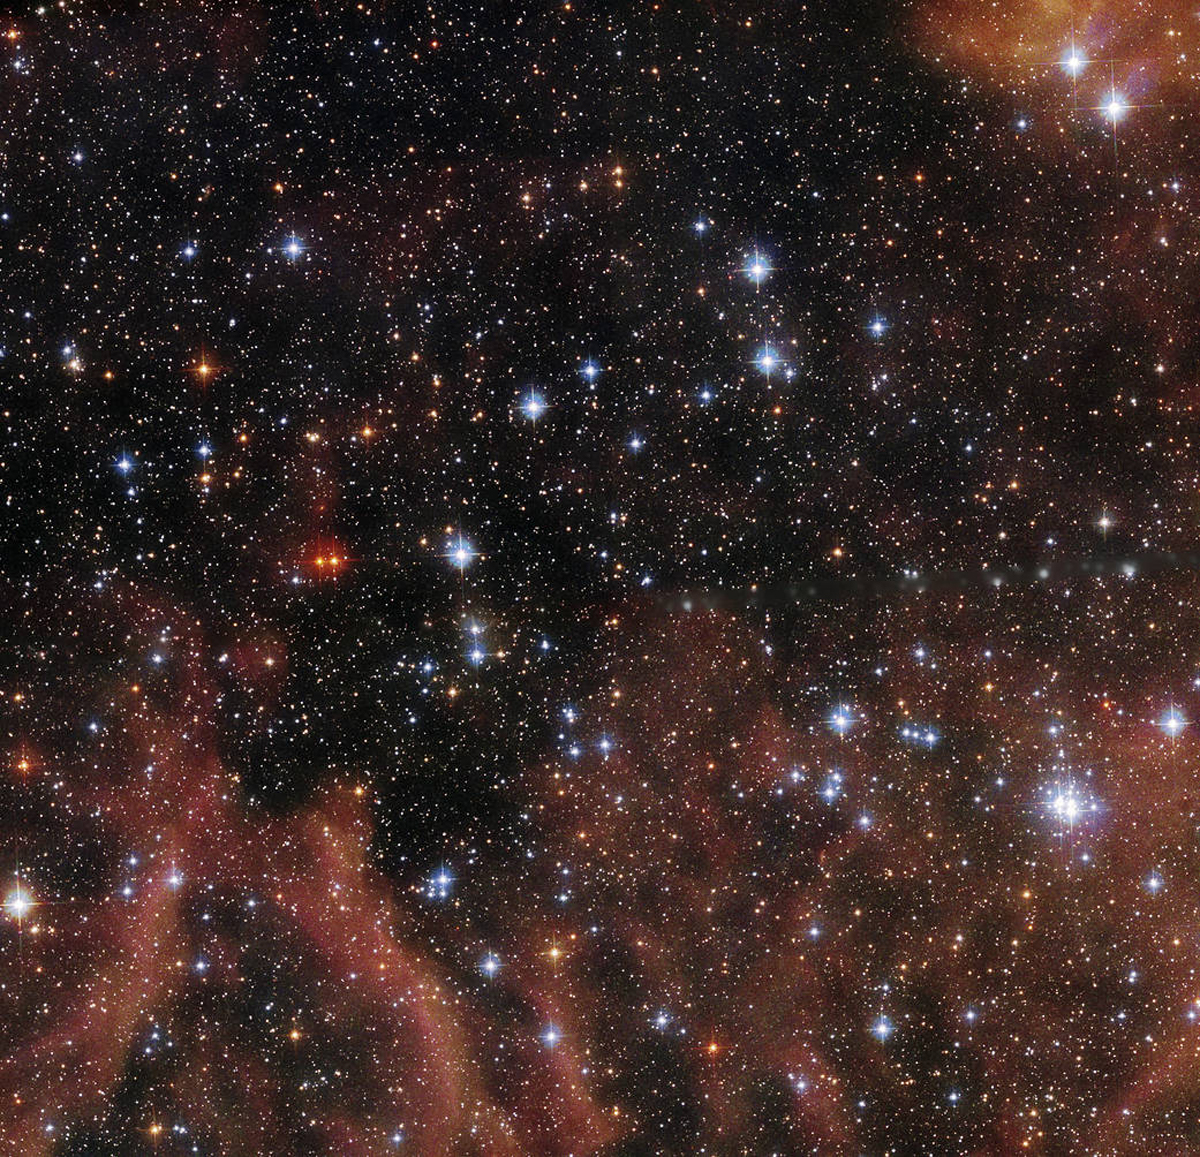 This Hubble Space Telescope image shows the open cluster BSDL 2757, a dwarf galaxy located in the Large Magellanic Cloud.